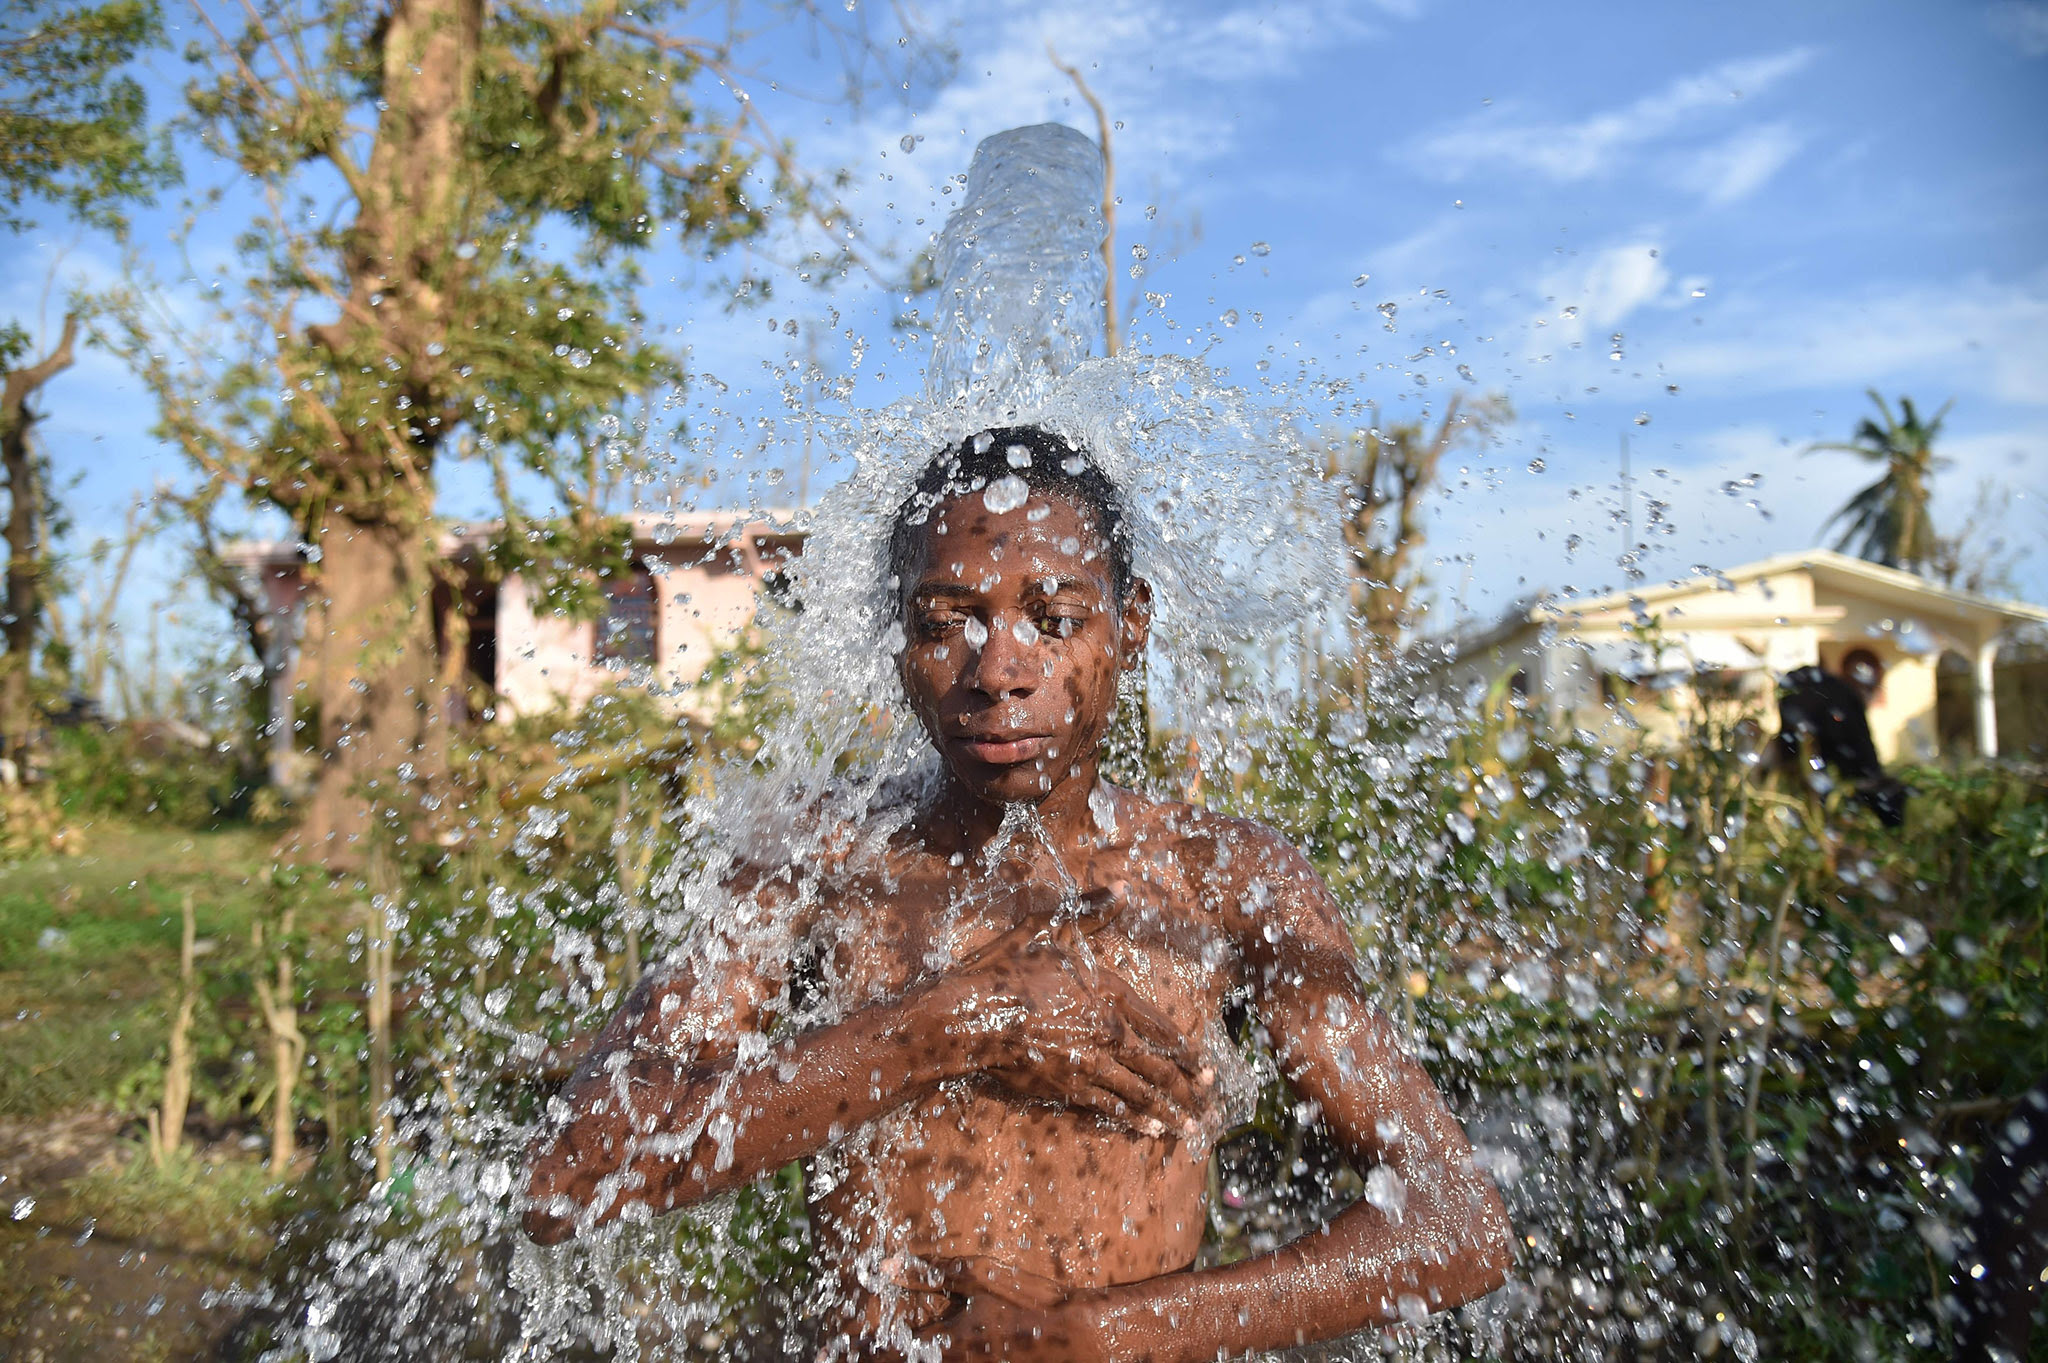 A young man takes a shower in a shower from a water fountain in Houk, in a rural zone of Les Cayes, an area damaged by Hurricane Matthew, in the Southwest of Haiti, on October 9, 2016.  Haiti began three days of mourning Sunday for hundreds killed in Hurricane Matthew as relief officials grappled with the unfolding devastation in the Caribbean country's hard-hit south. Matthew crashed ashore on Haiti's southern coast on October 4 as a monster Category 4 storm, packing 145 mile (230 kilometer) winds. Civil defense officials have put the death toll at 336, although some officials said it topped 400.   / AFP PHOTO / HECTOR RETAMALHECTOR RETAMAL/AFP/Getty Images